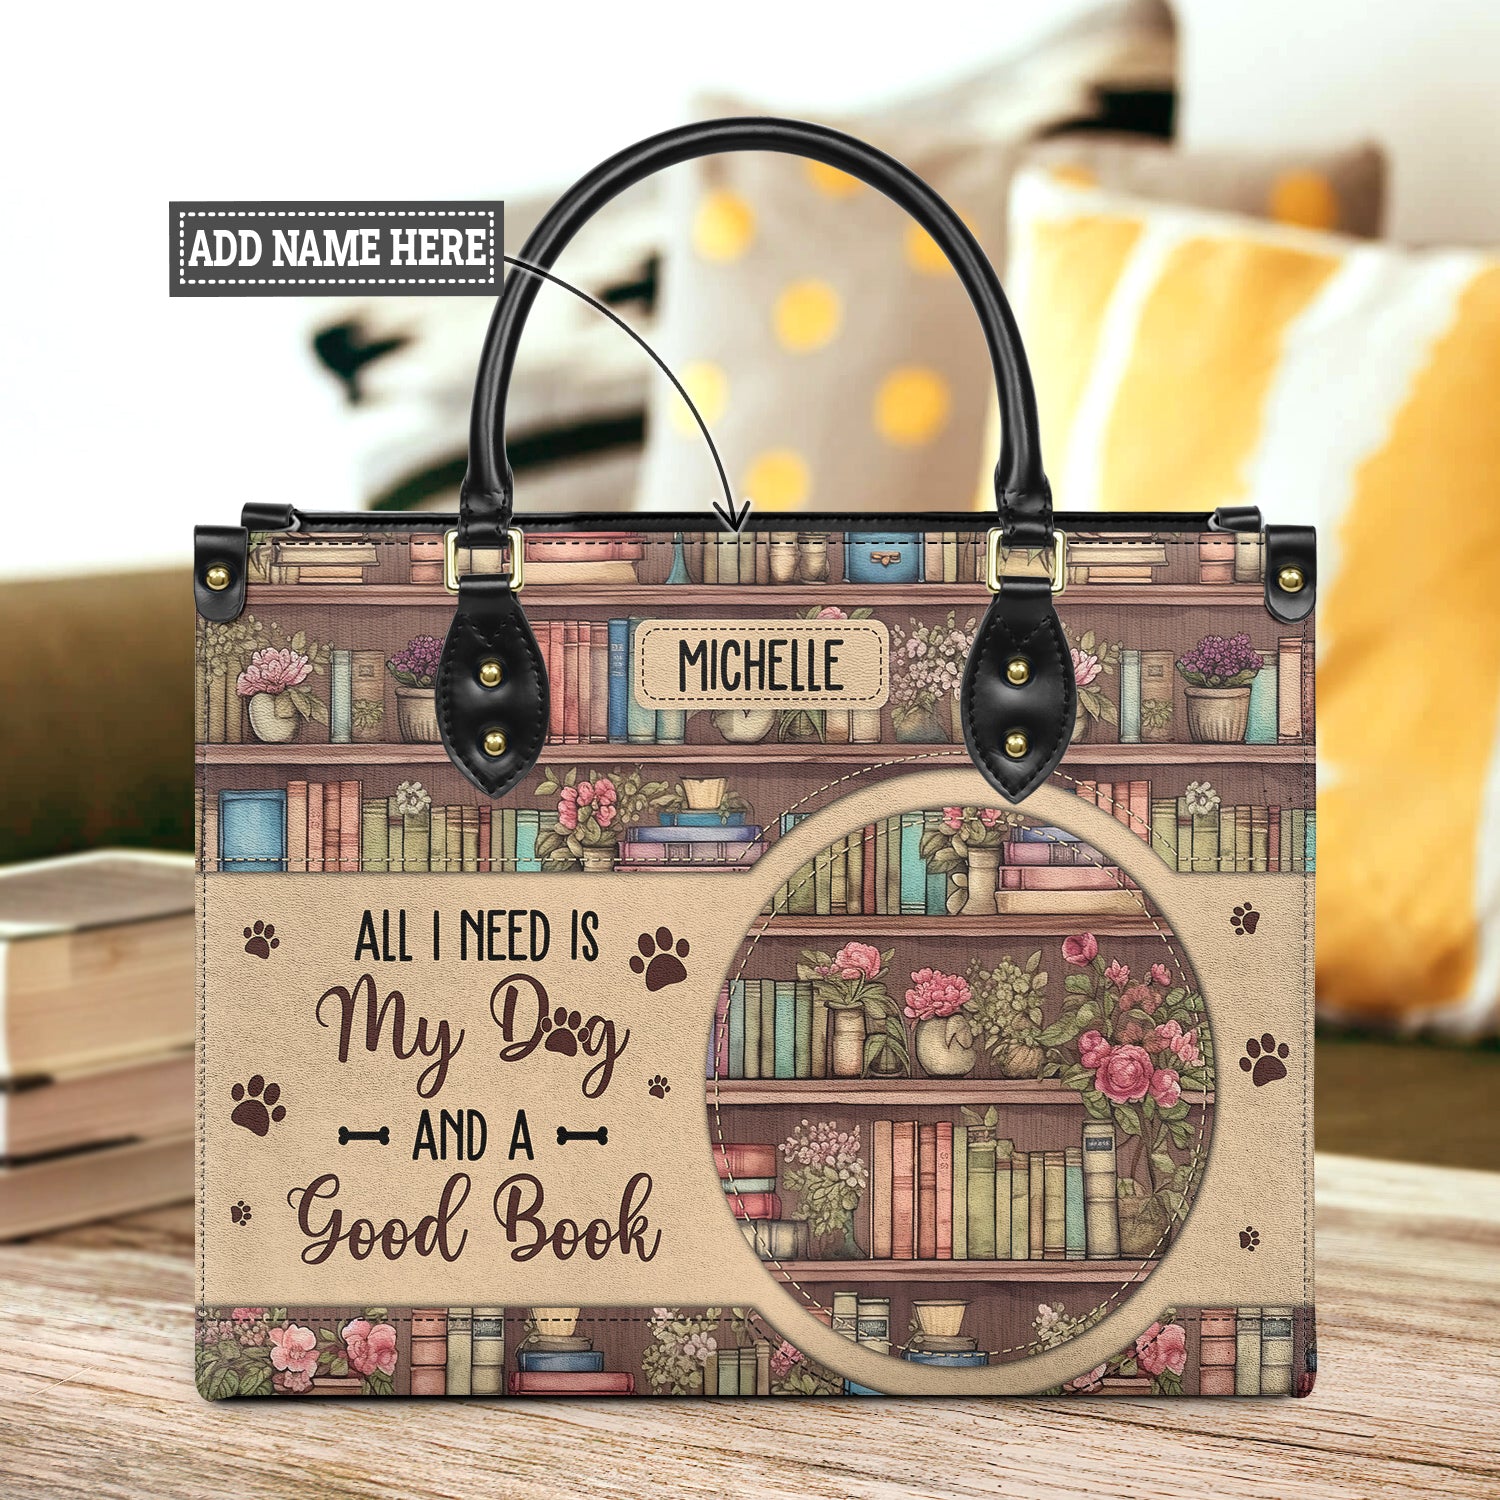 All I Need Is My Dog And A Good Book HHRZ03083656MD Leather Bag